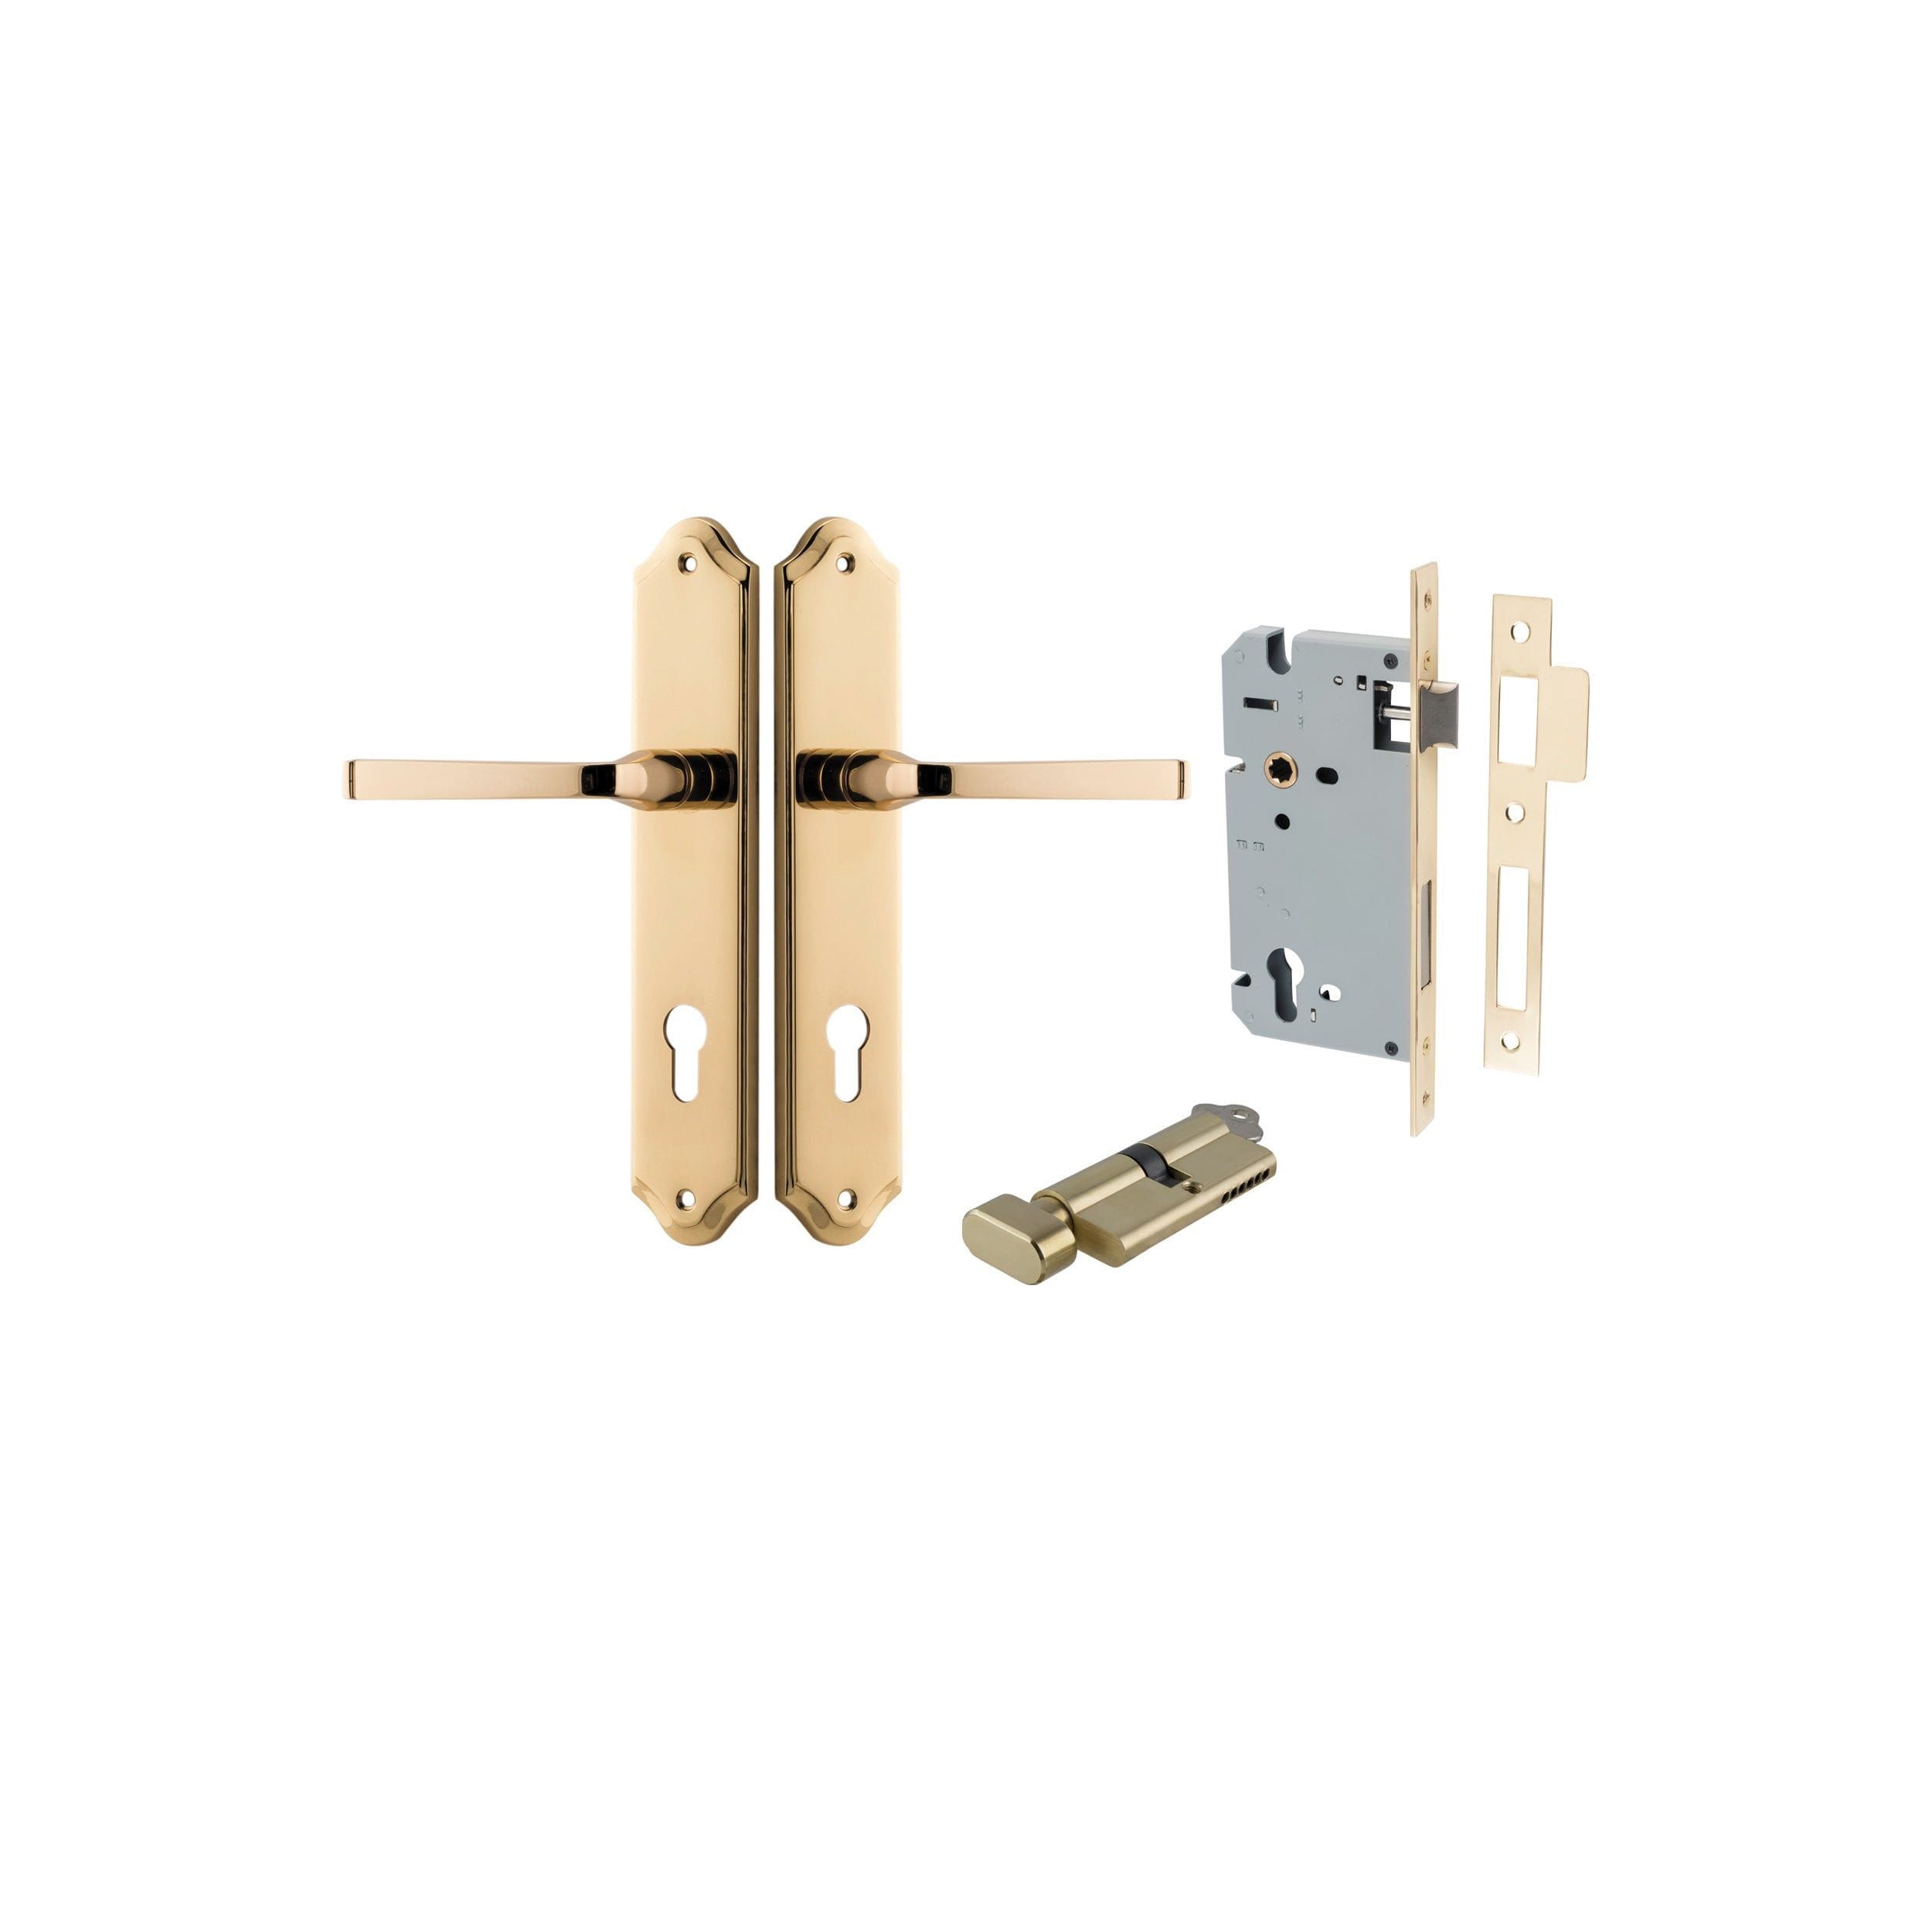 Annecy Lever Shouldered Polished Brass Entrance Kit - Key/Thumb Turn